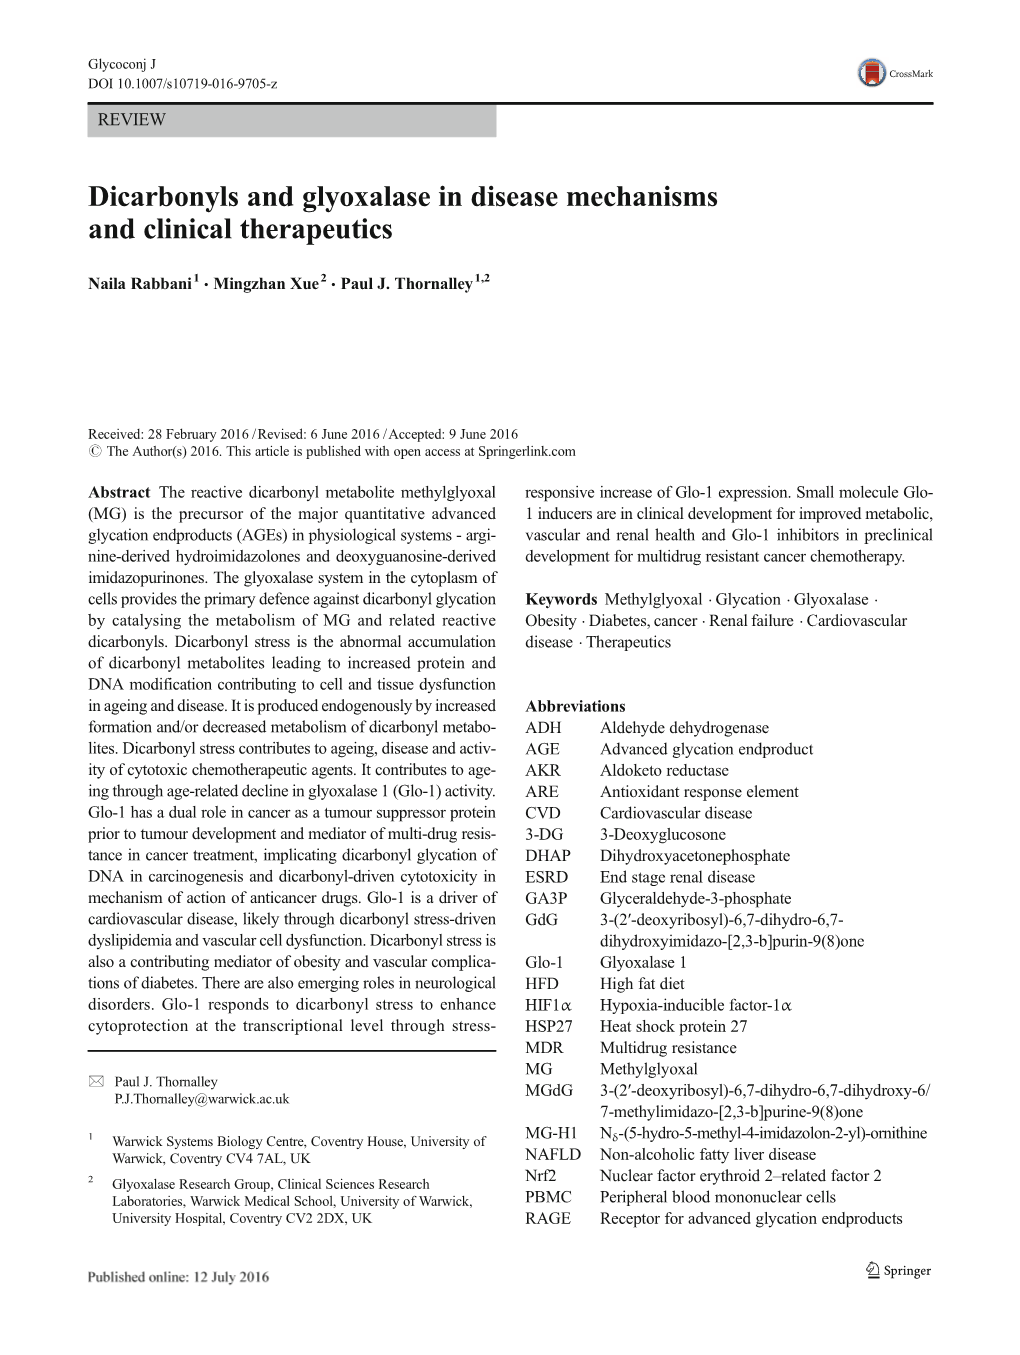 Dicarbonyls and Glyoxalase in Disease Mechanisms and Clinical Therapeutics